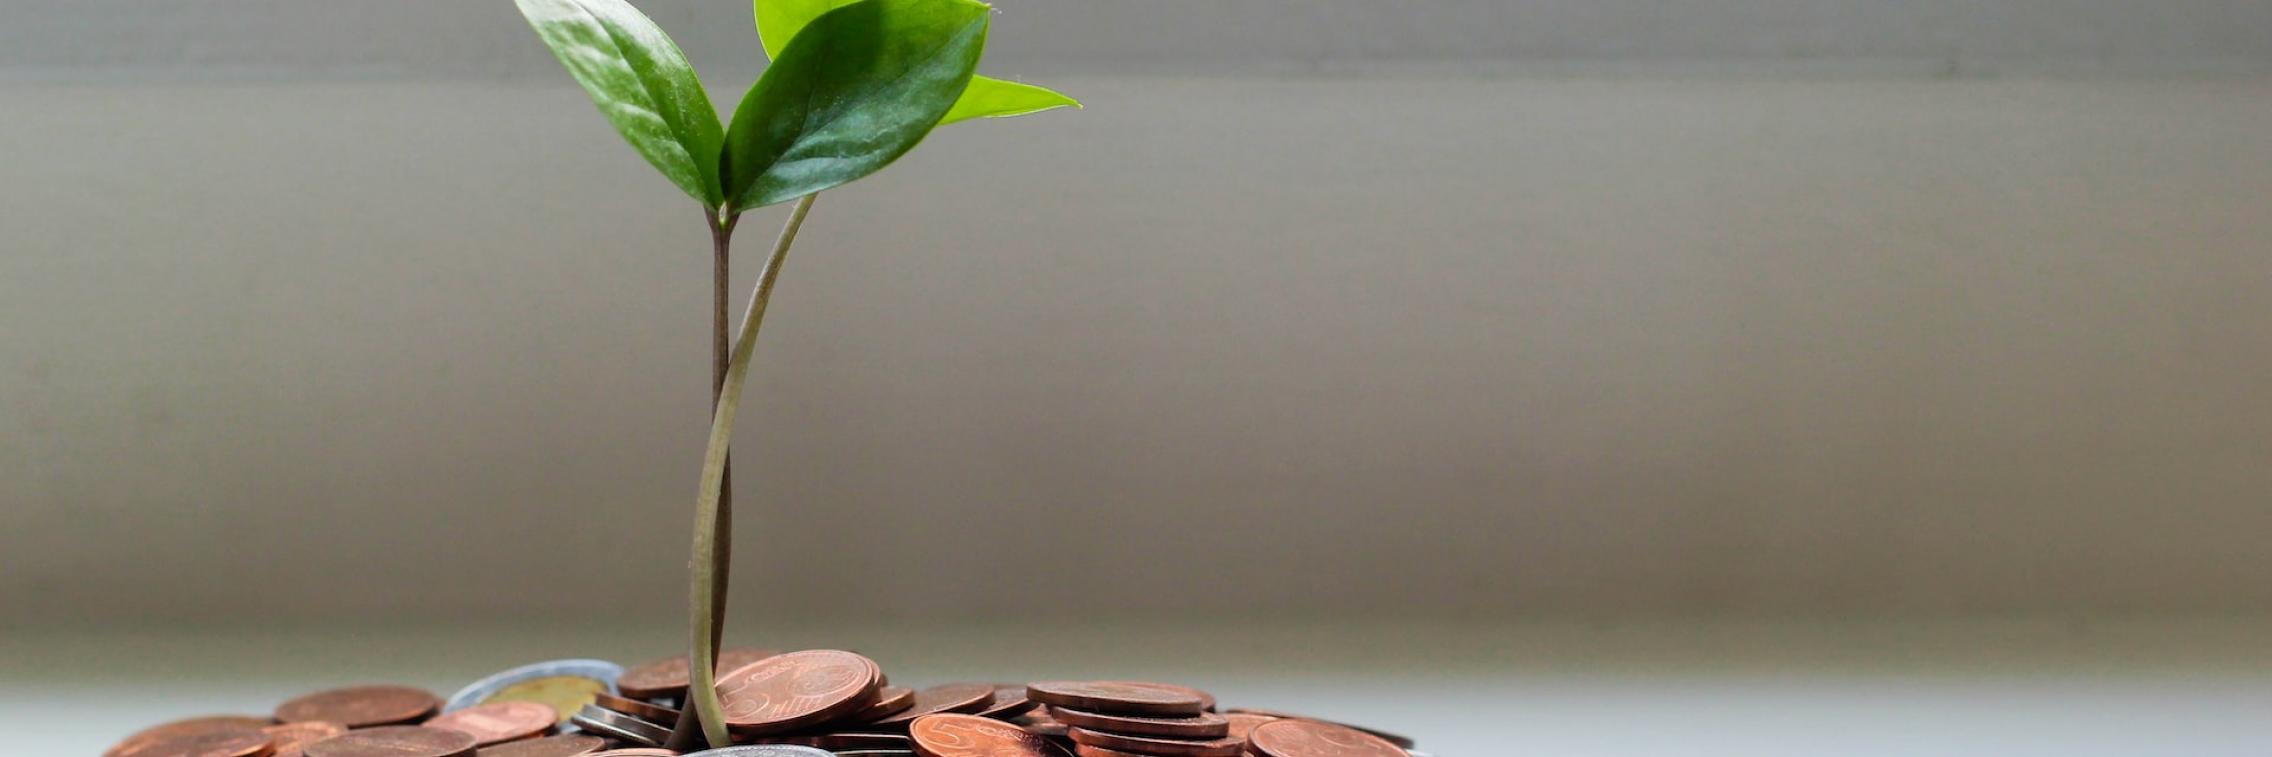 Pile of coins with a plant growing through